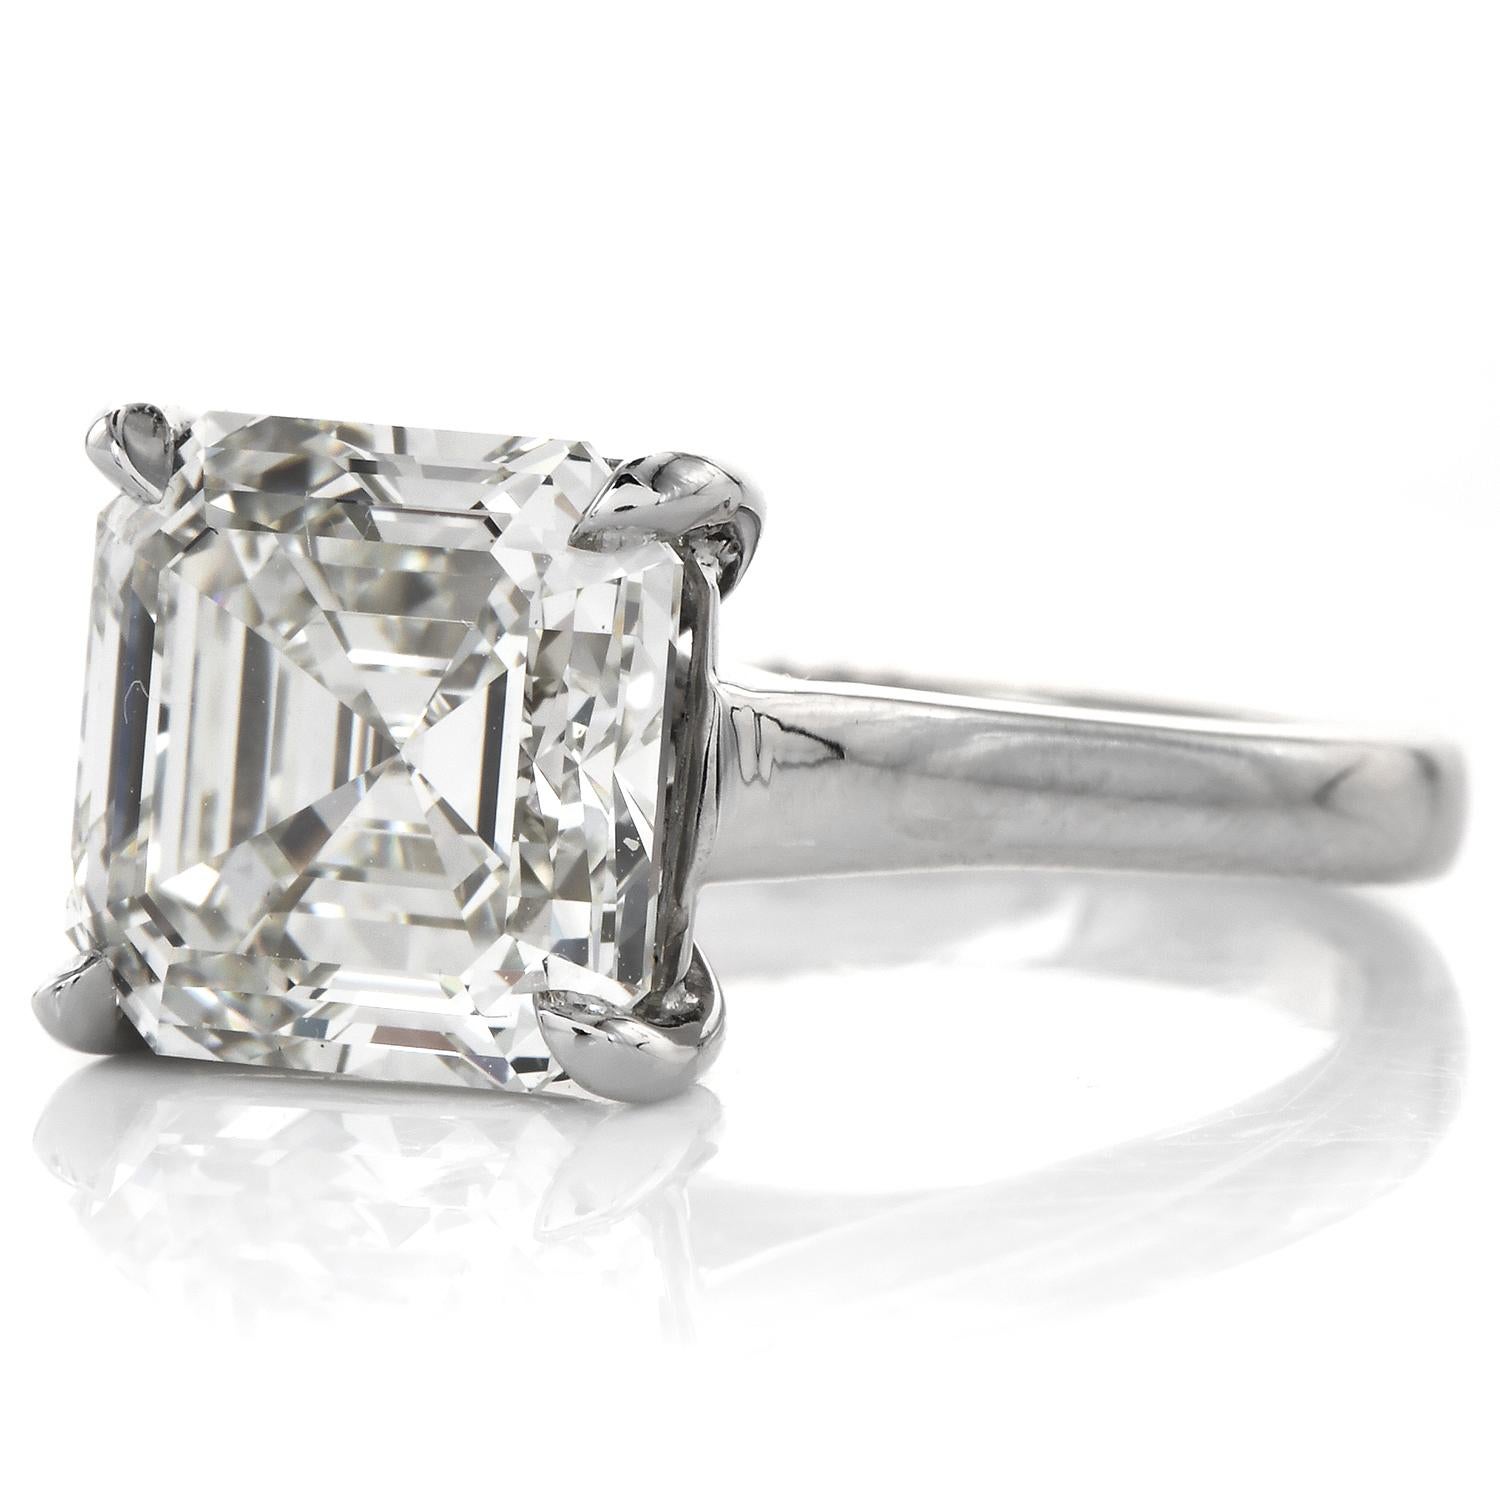 Women's Classic GIA 5.49cts Square Emerald-Cut Diamond Engagement Ring